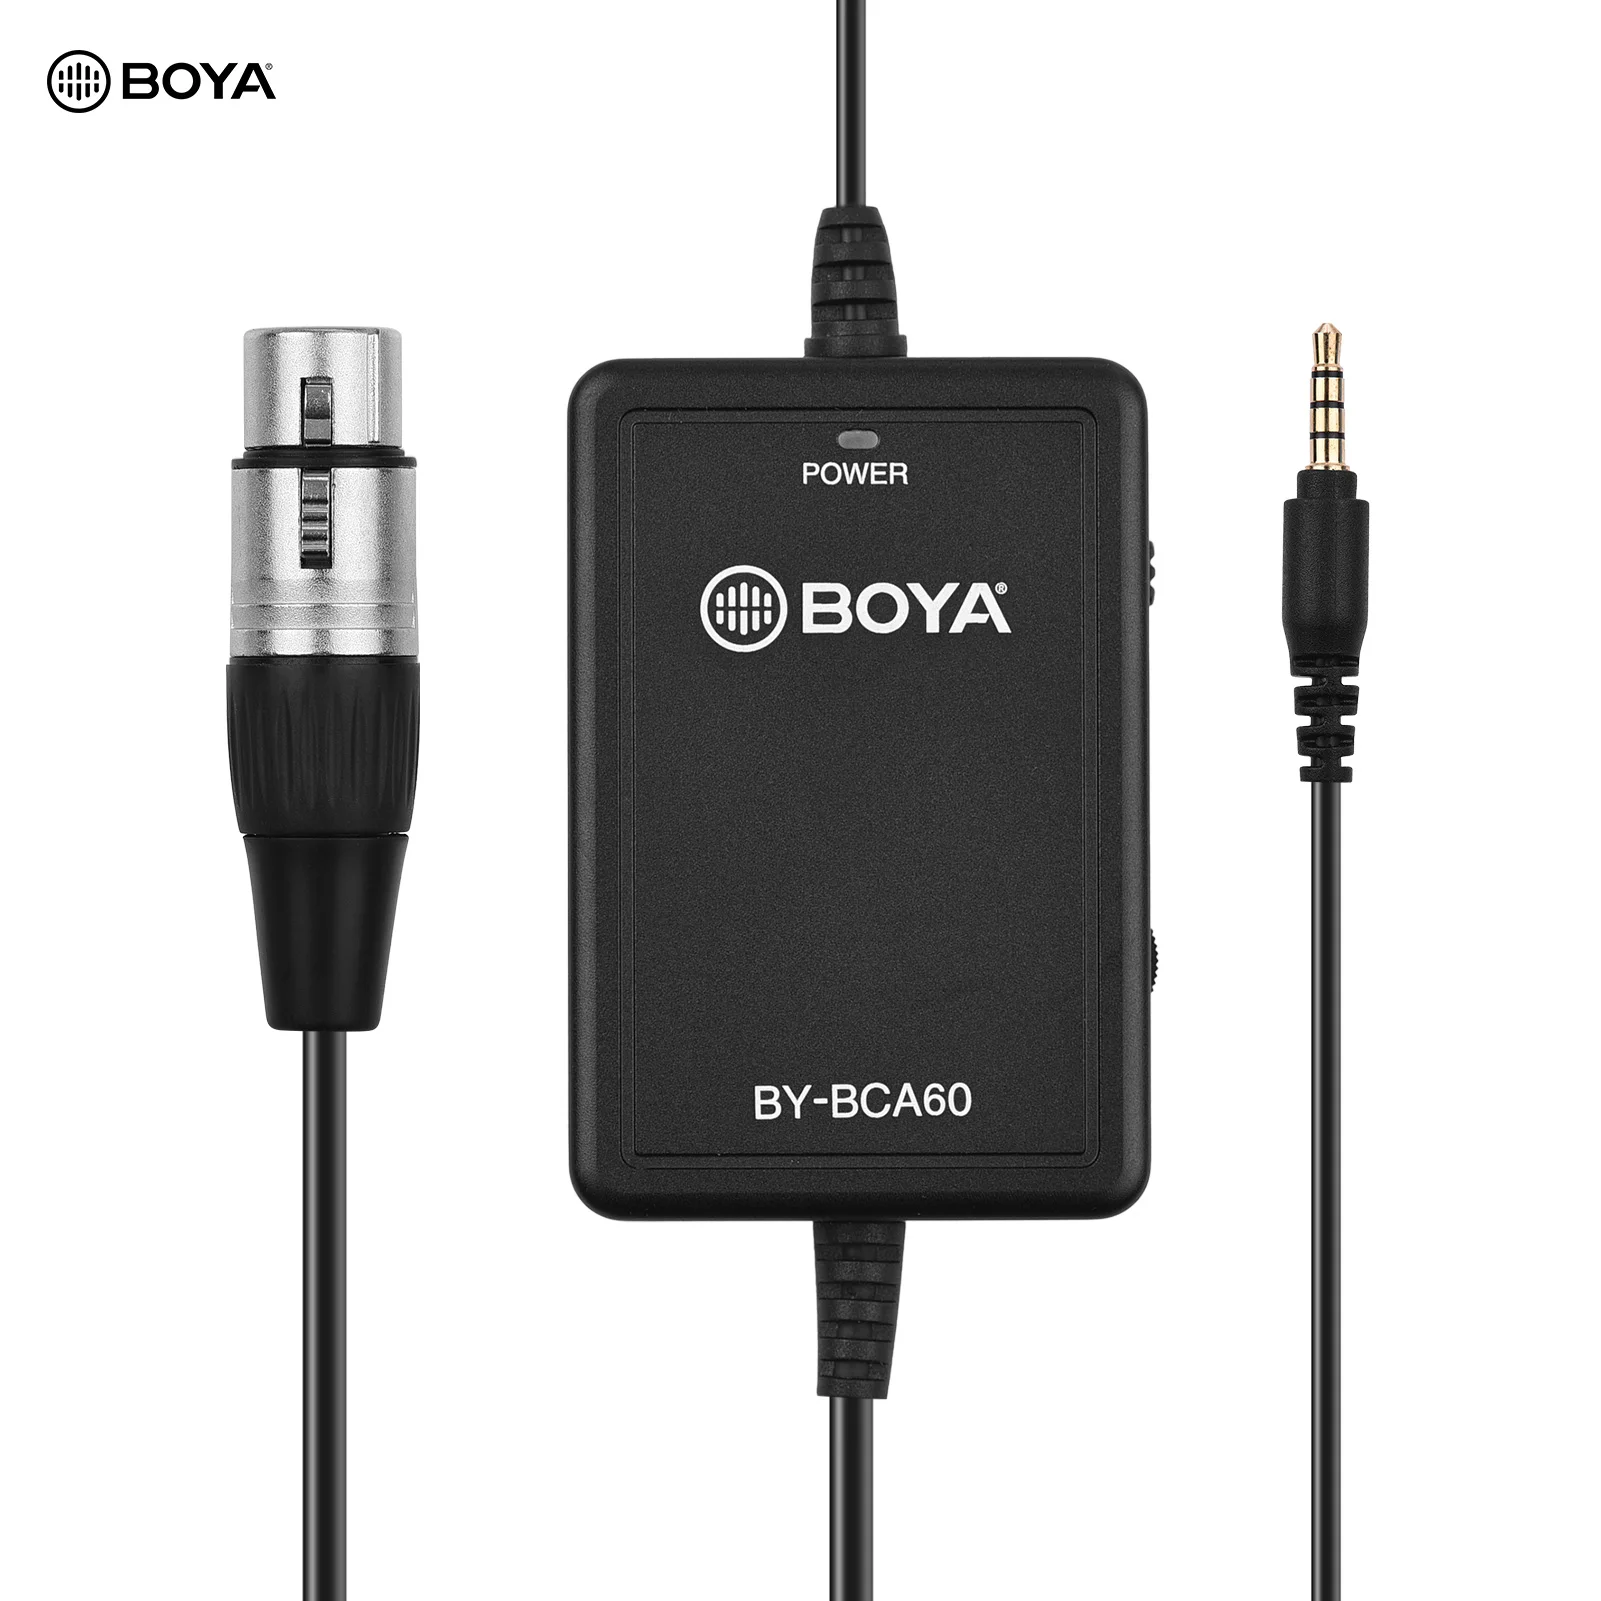 

BOYA BY-BCA60 6M Ultra Long Microphone Cable XLR to 3.5mm TRRS 3.5mm Headphone Jack for Smartphone Tablet Laptop Camera